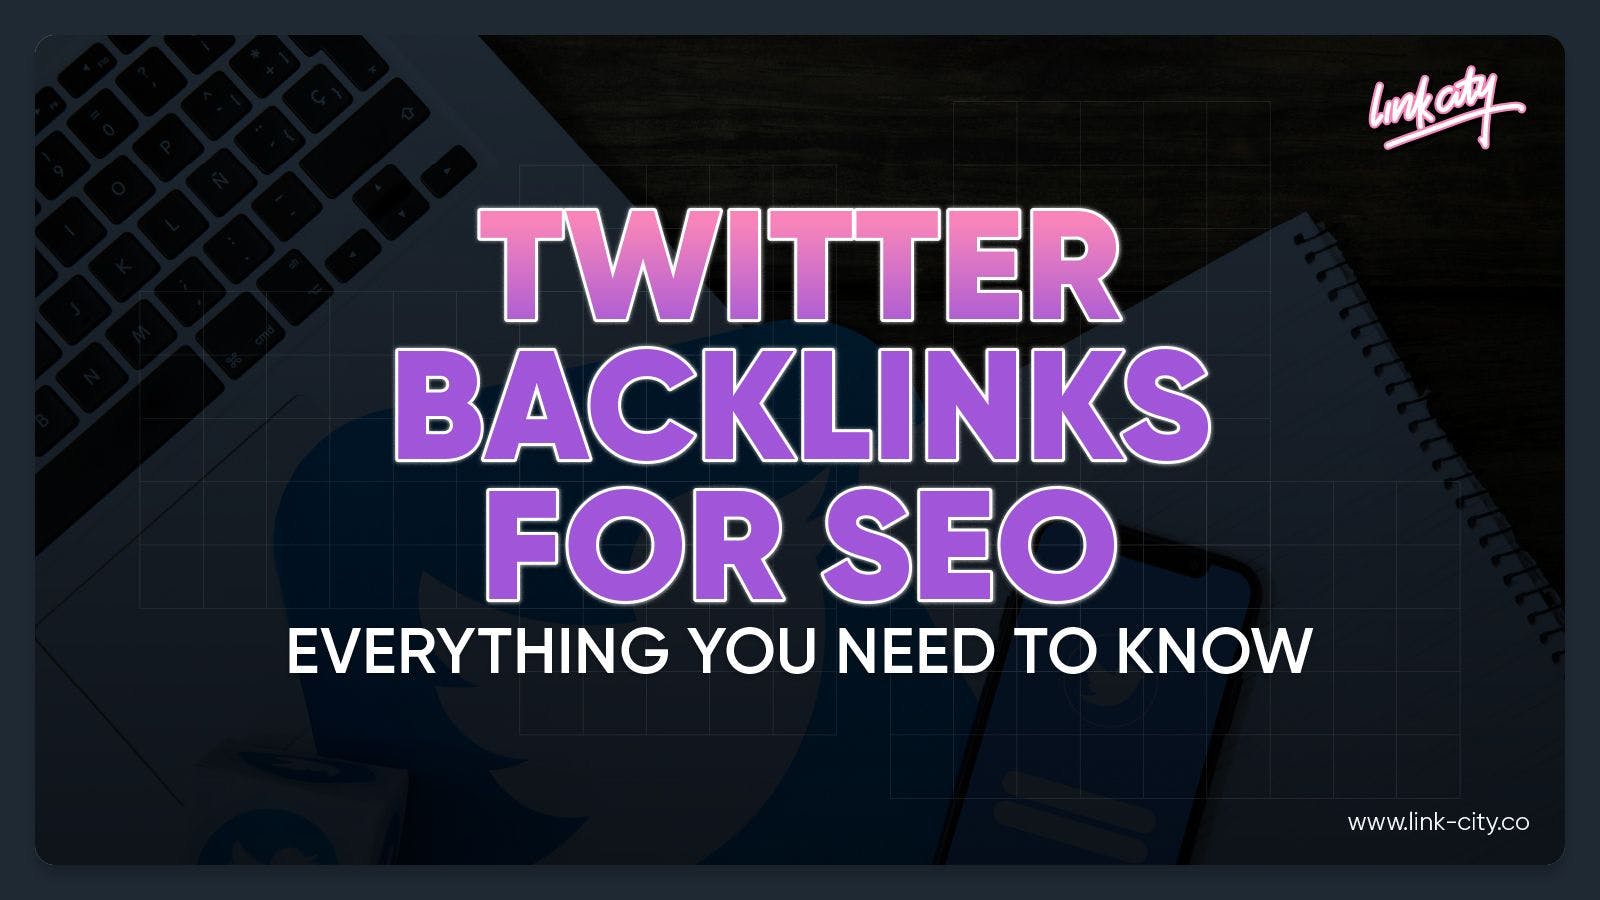 Twitter Backlinks for SEO - Everything You Need To Know